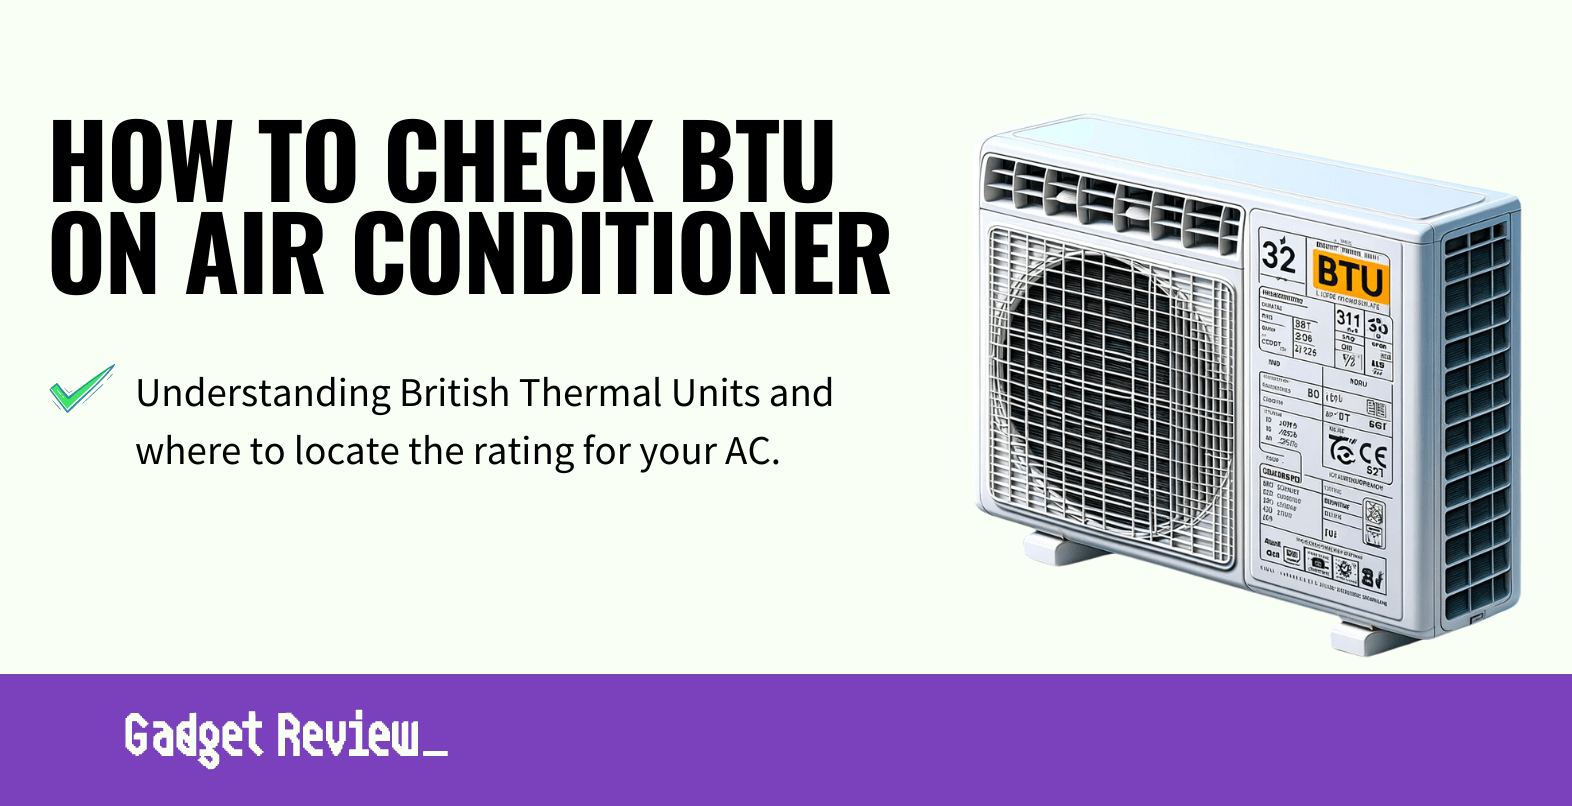 How to Check the BTU on an Air Conditioner